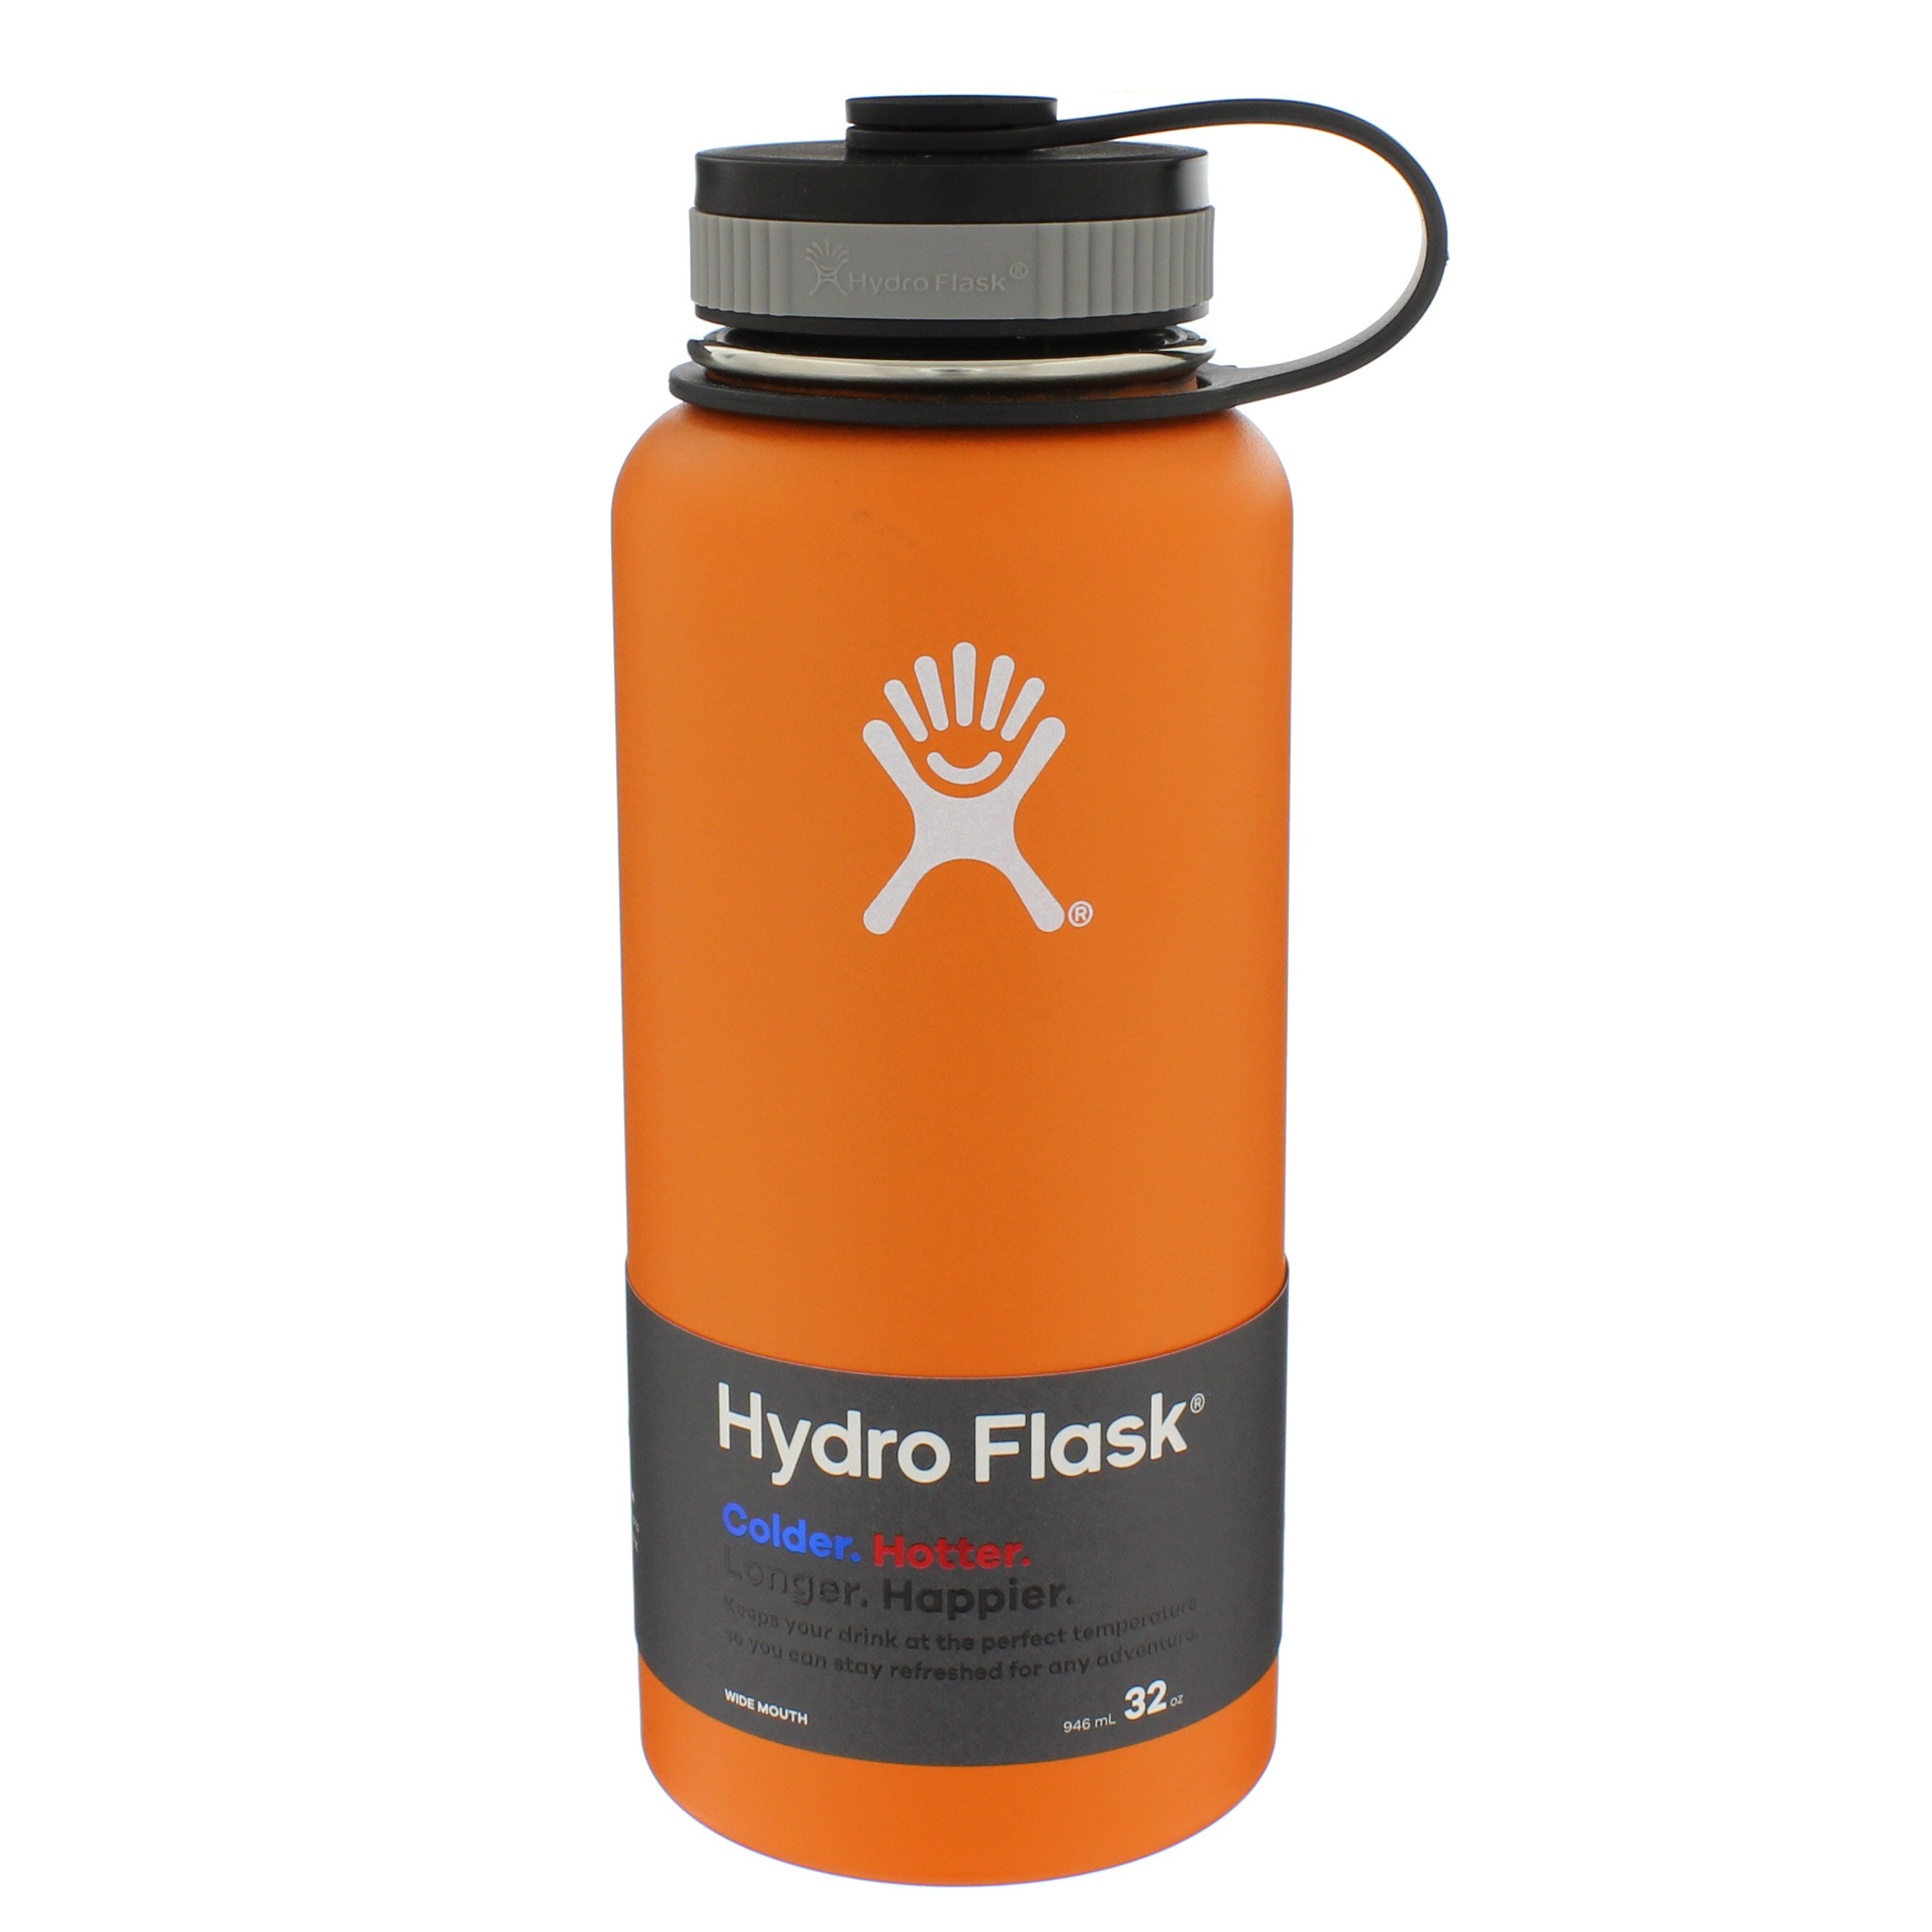 Hydro Flask 32oz Wide Mouth Orange Zest - Shop Travel & To-Go at H-E-B